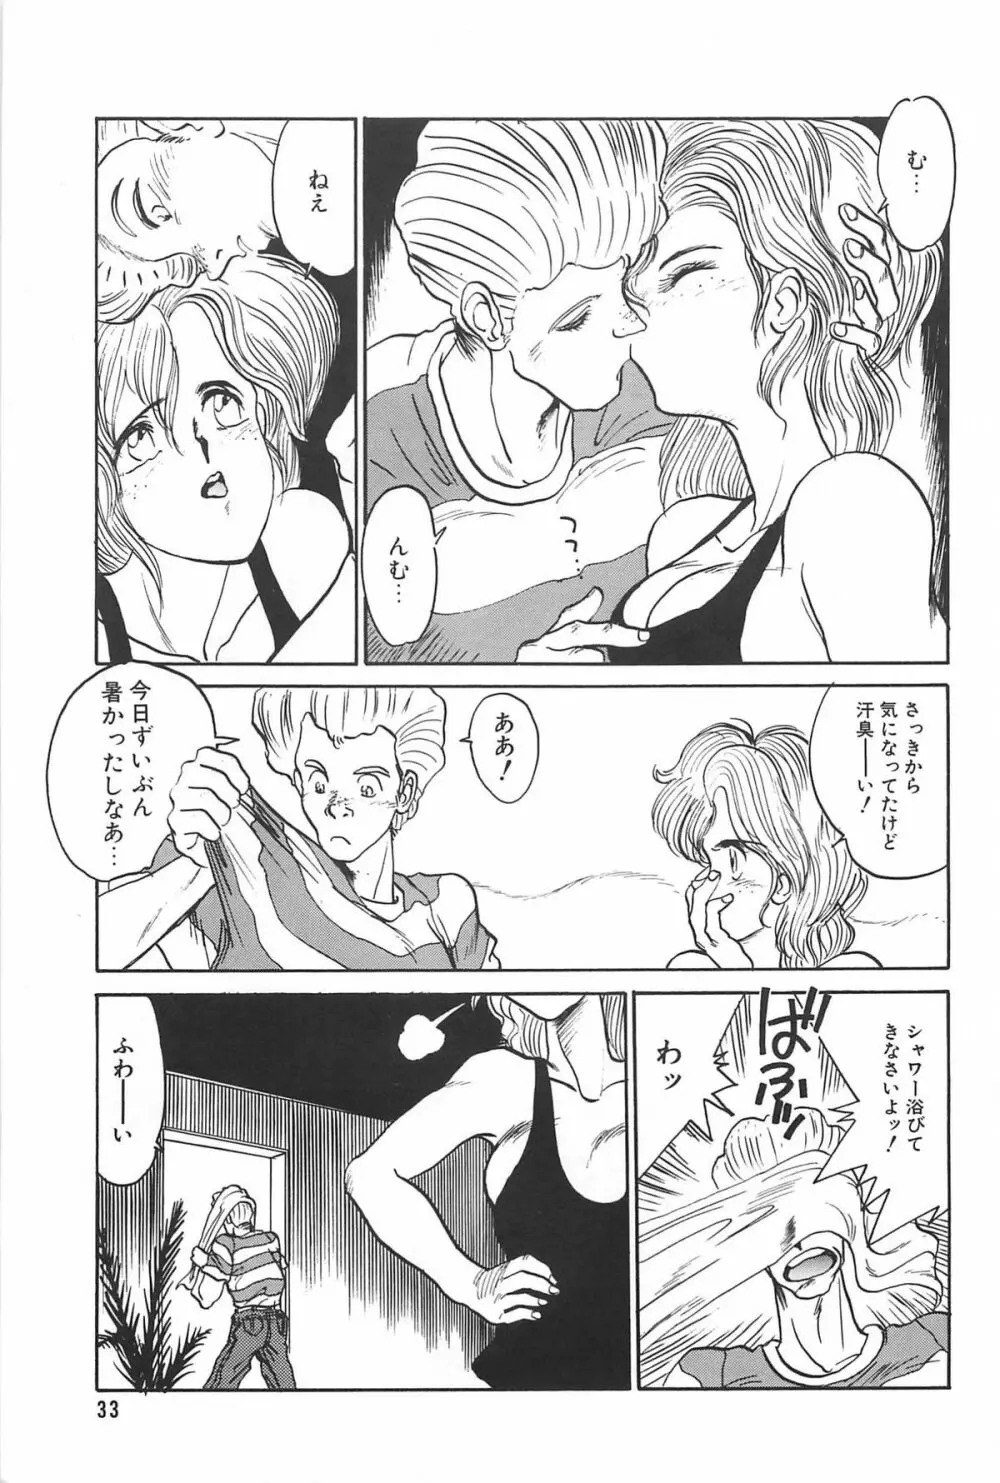 LOVE ME 1995 Page.35